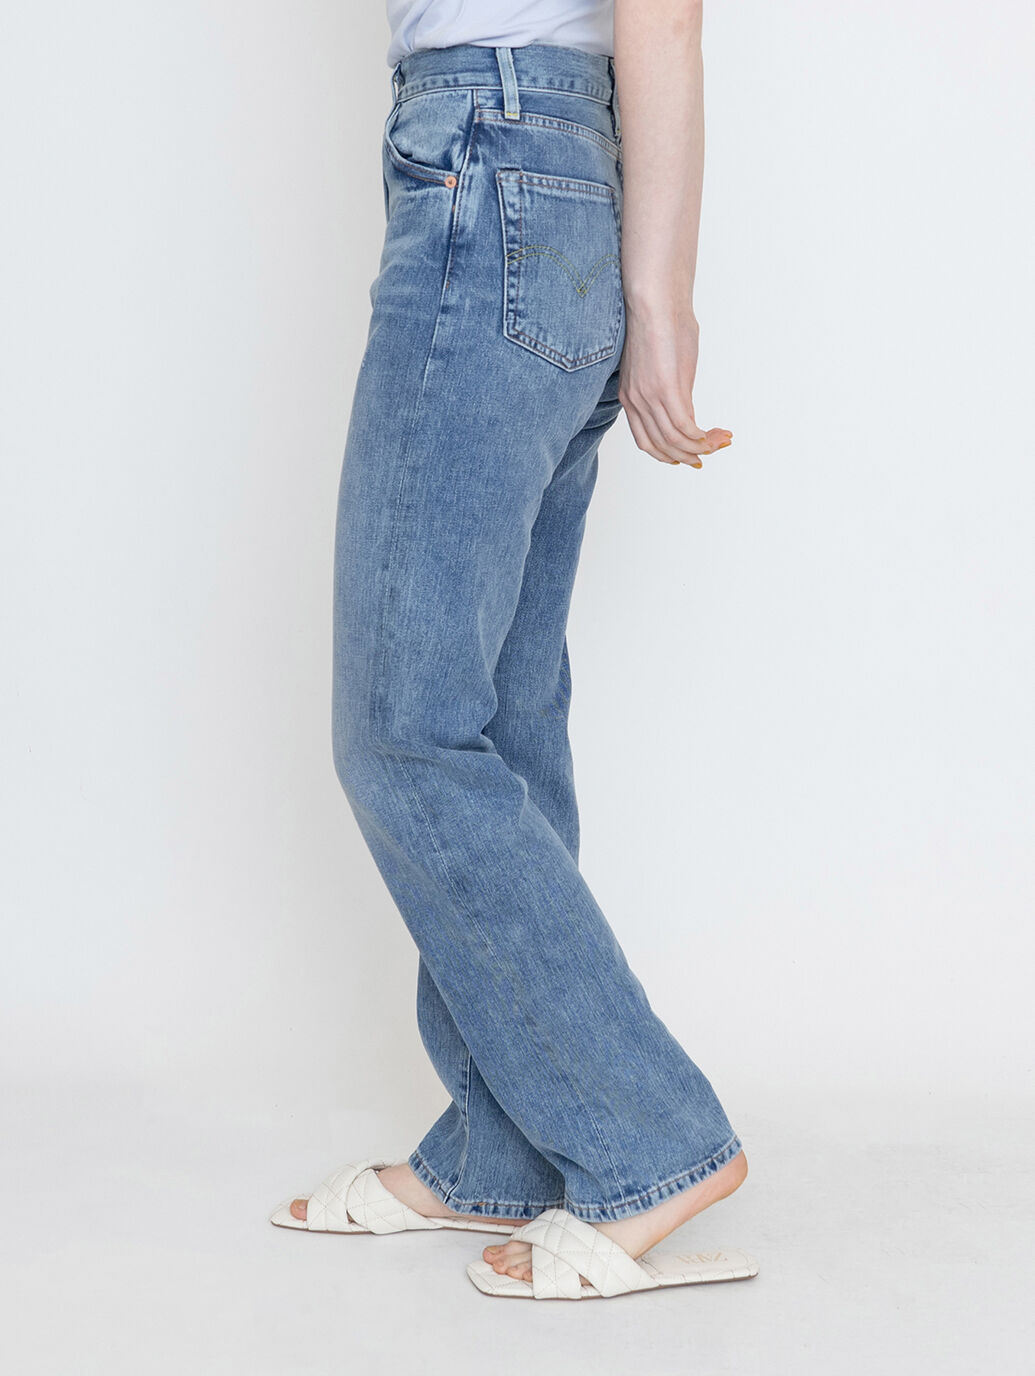 LEVI'S® VINTAGE CLOTHING1950モデル 701 JEANS JAGGED ORB 